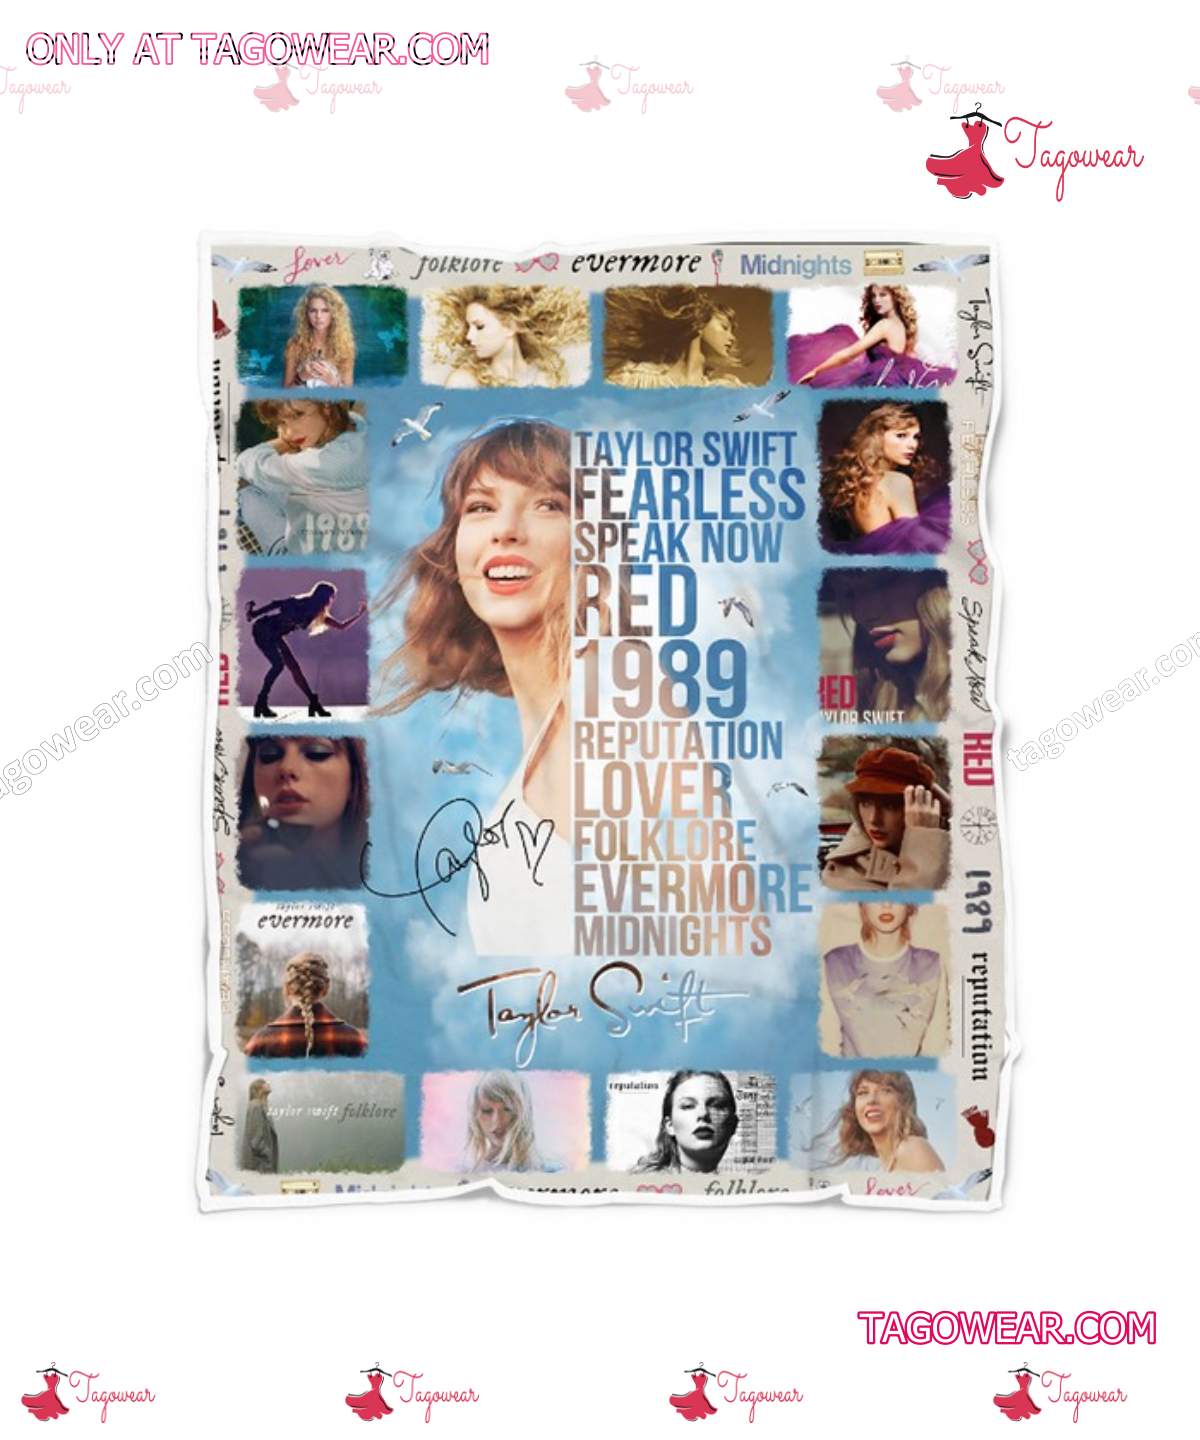 Taylor Swift Fearless Speak Now Red 1989 Reputation Lover Folklore Evermore Midnights Blanket